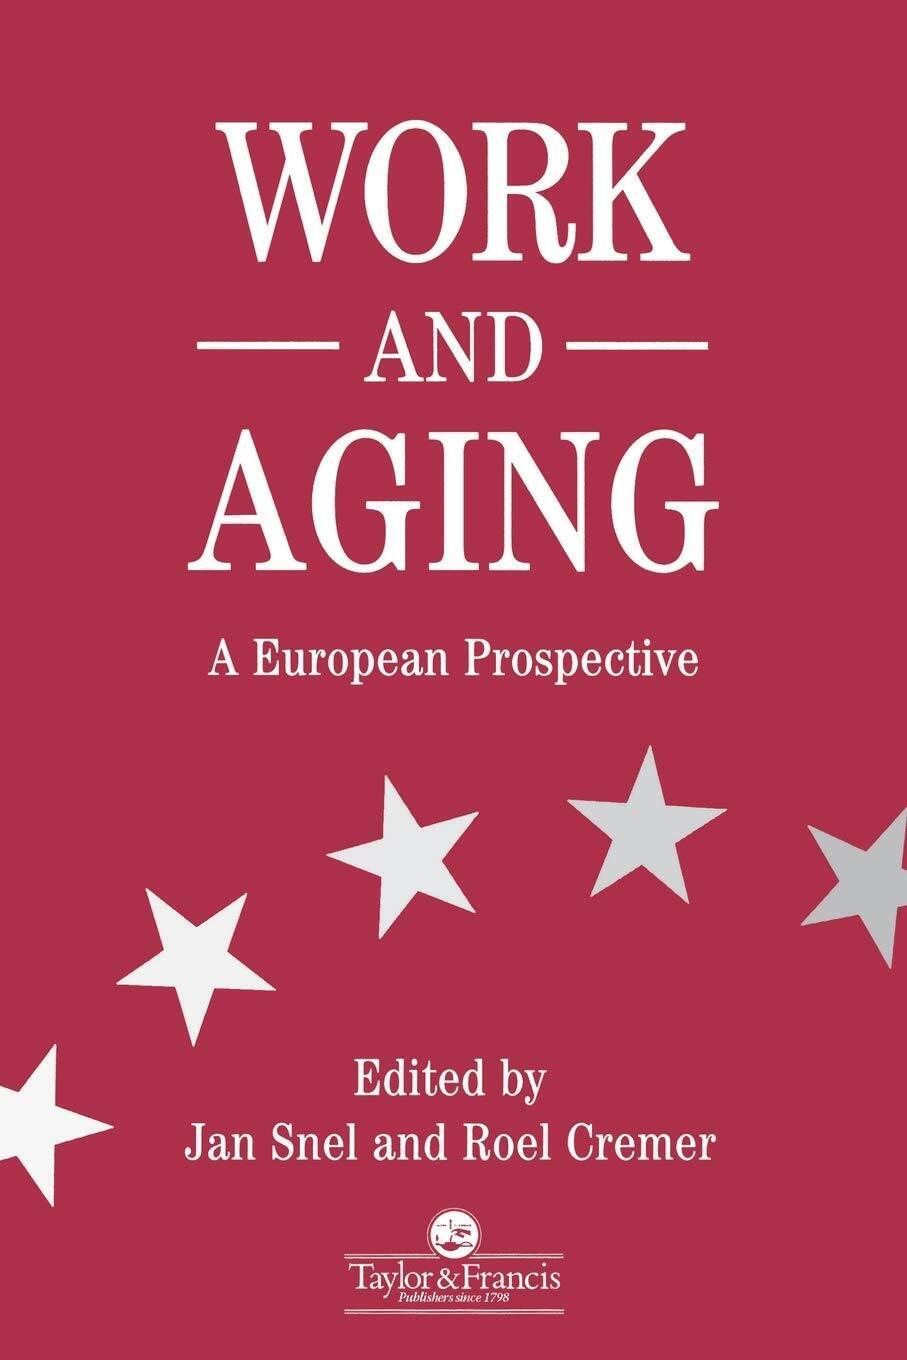 Work and Aging: A European Prospective -  Jan Snel - Taylor & Francis, 1995